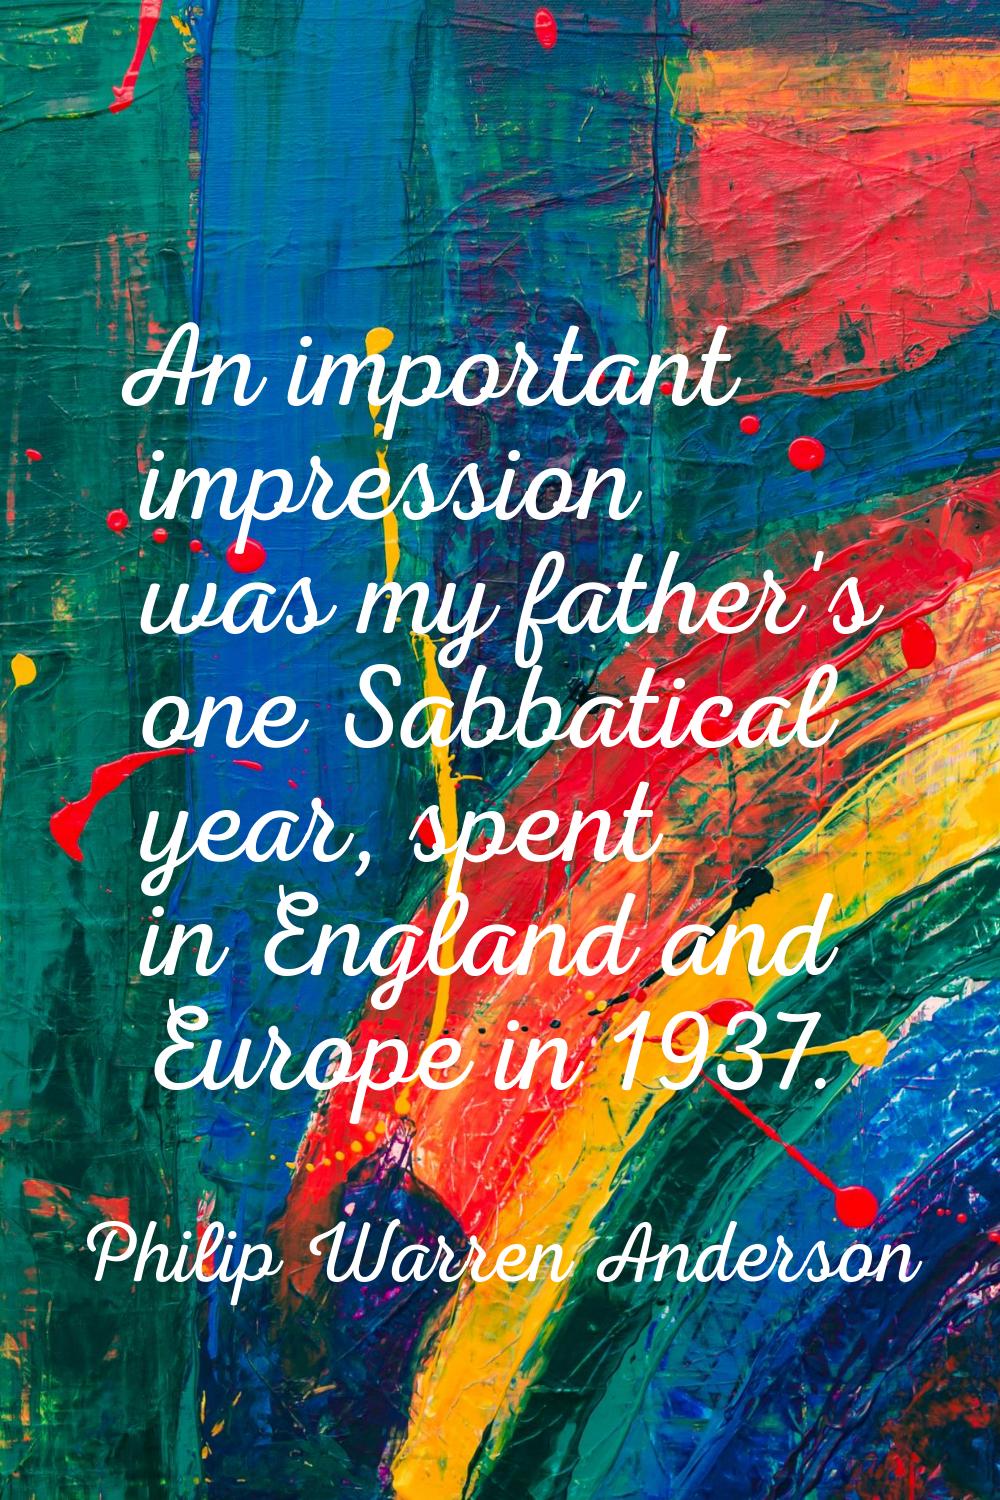 An important impression was my father's one Sabbatical year, spent in England and Europe in 1937.